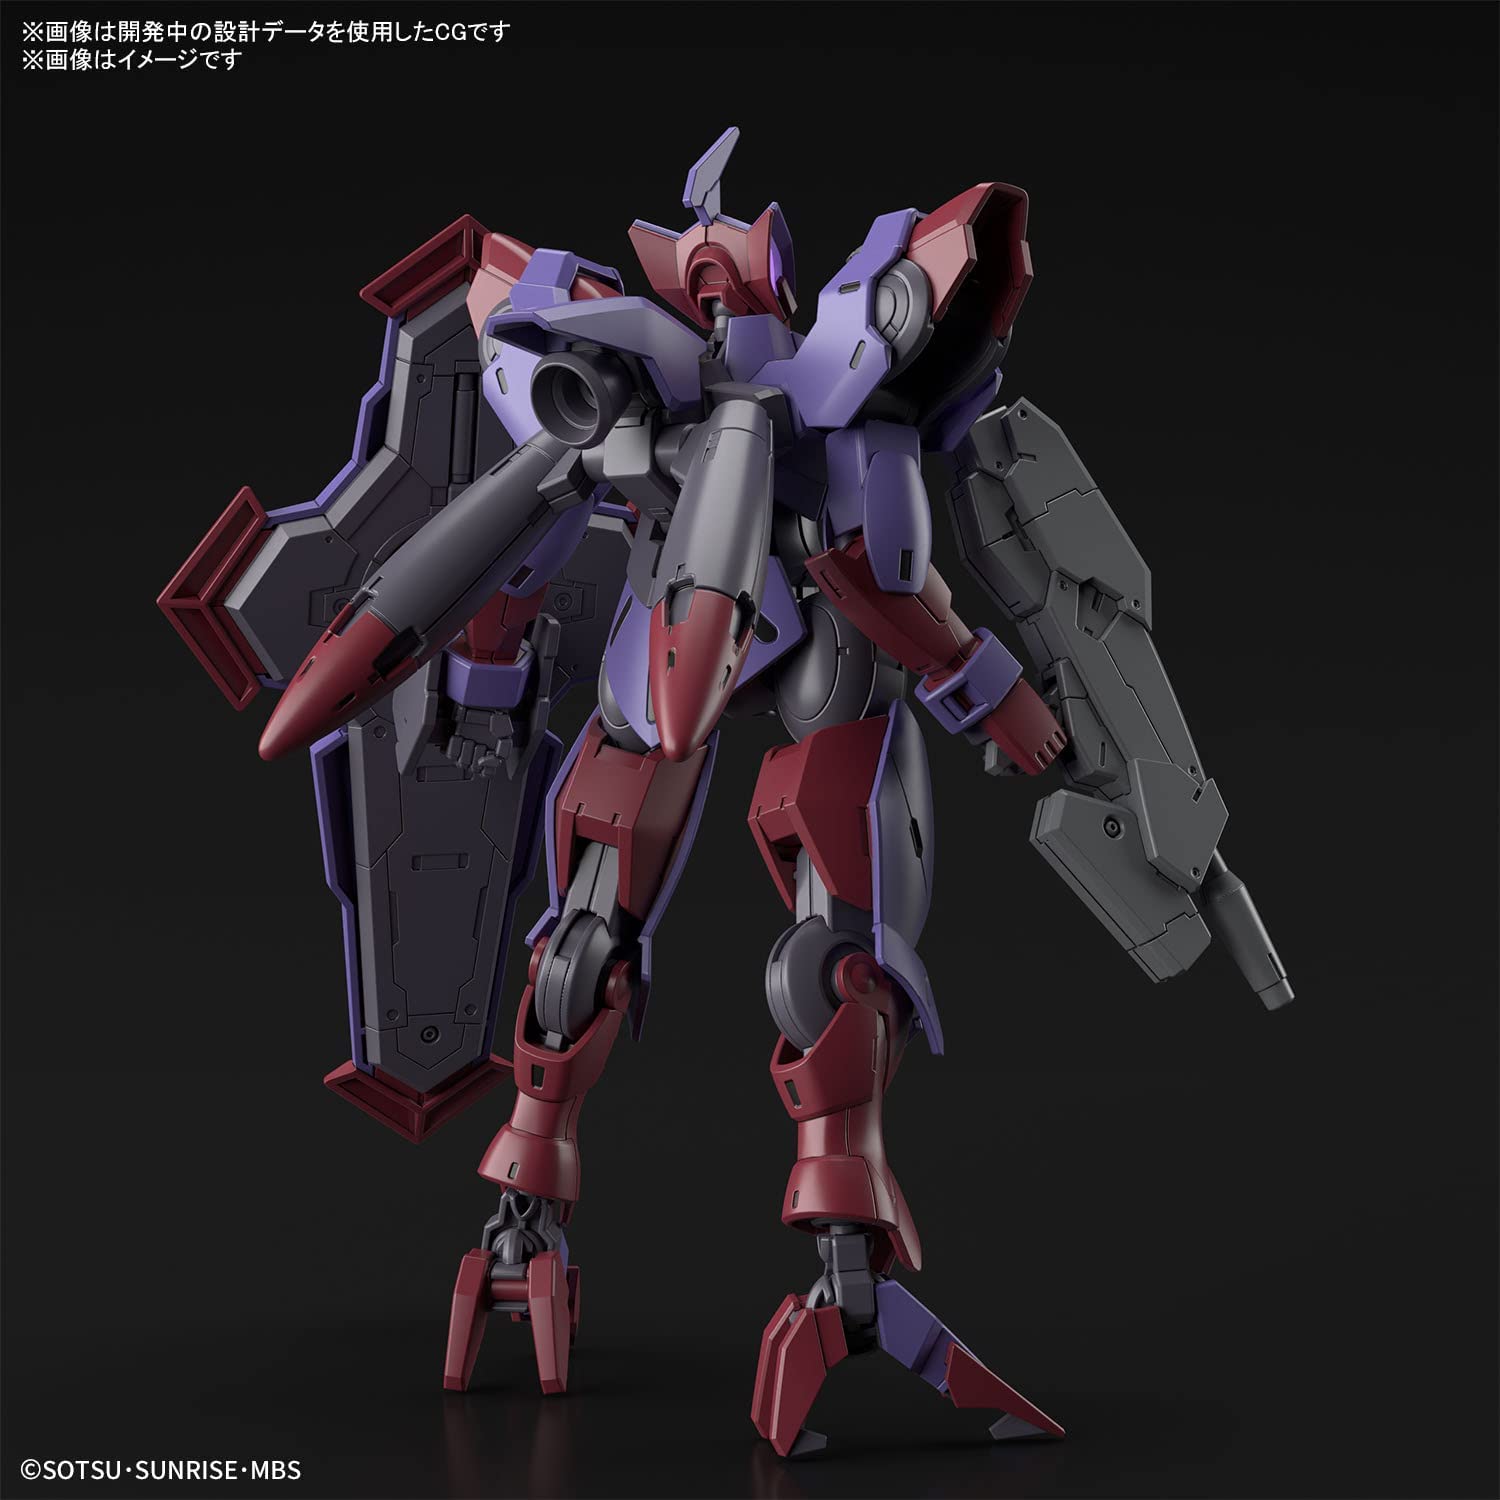 1/144 HG Beguir-Pente (Mobile Suit Gundam: The Witch from Mercur